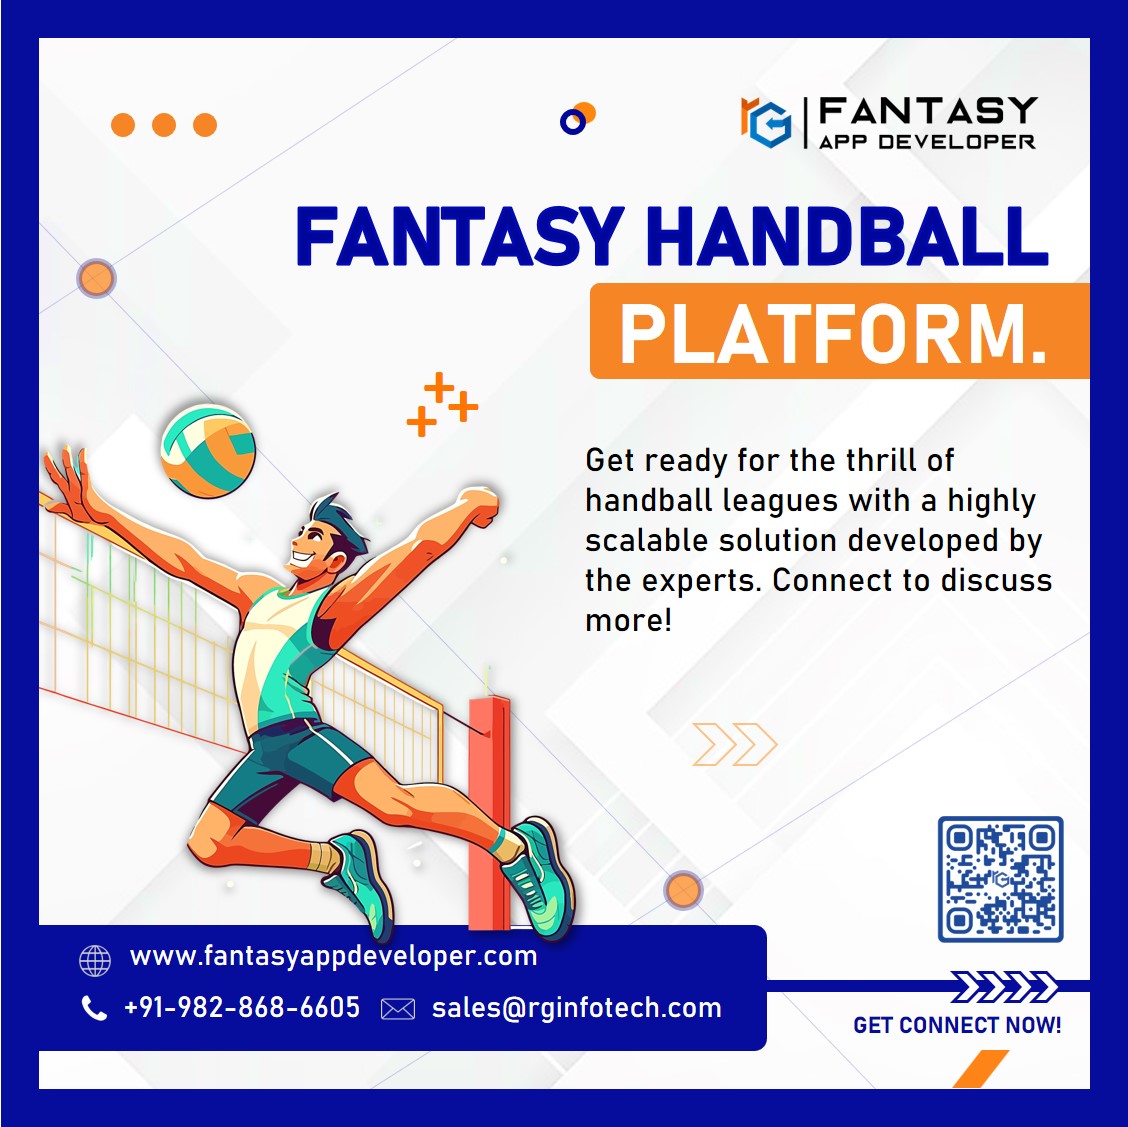 Fuel your enthusiasm for #Handball with our highly scalable #FantasyHandball #Platform💯🔥

Connect with our #experts right away at +91-9828686605 📞 or DM @fantasyappdev for more details 🤟🔥

#fantasyappdeveloper #India #trending #appdevelopment #appdeveloper #TrendingIndia